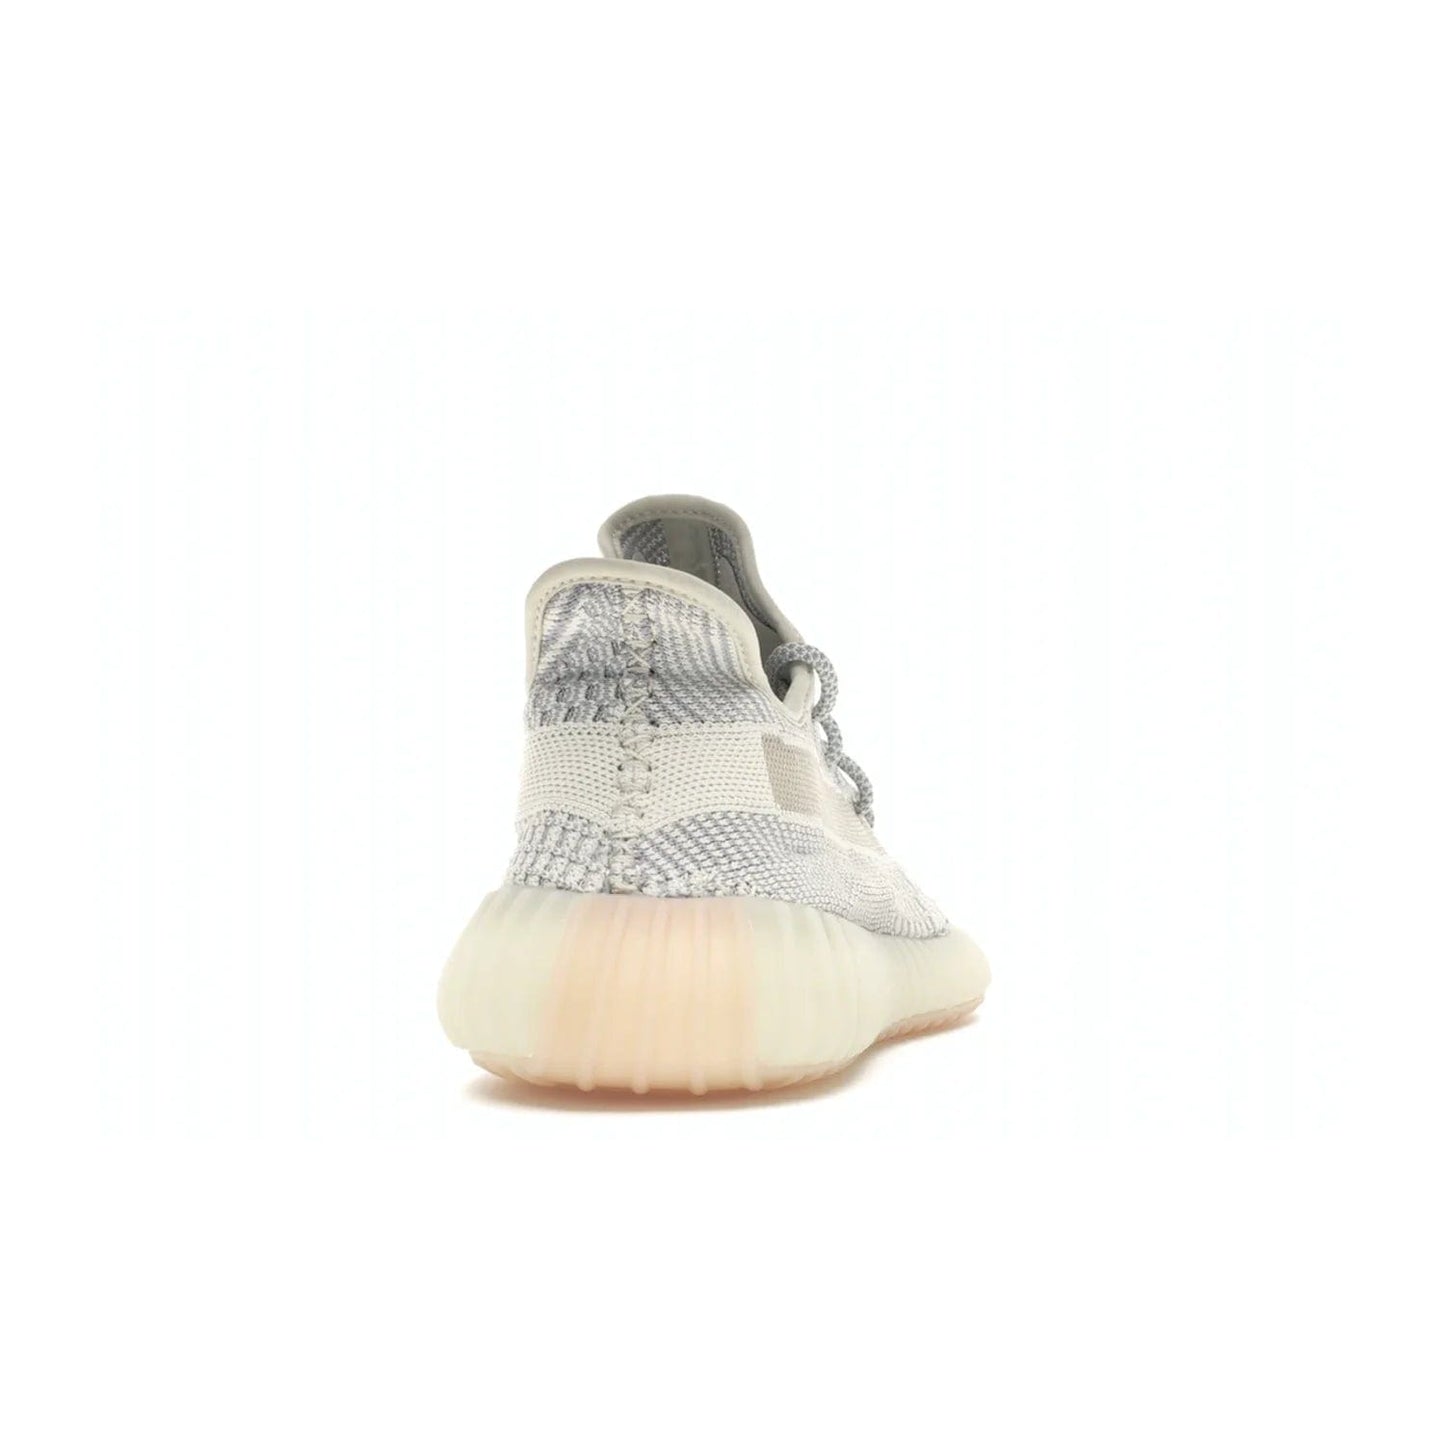 adidas Yeezy Boost 350 V2 Lundmark (Non Reflective) - Image 29 - Only at www.BallersClubKickz.com - Shop the exclusive adidas Yeezy Boost 350 V2 Lundmark with a subtle summer color, mesh upper, white-to-cream transitional midsole, light tan outsole, and pink middle stripe. Comfort and style come together in this perfect summer 350 V2. Released on July 11, 2019.